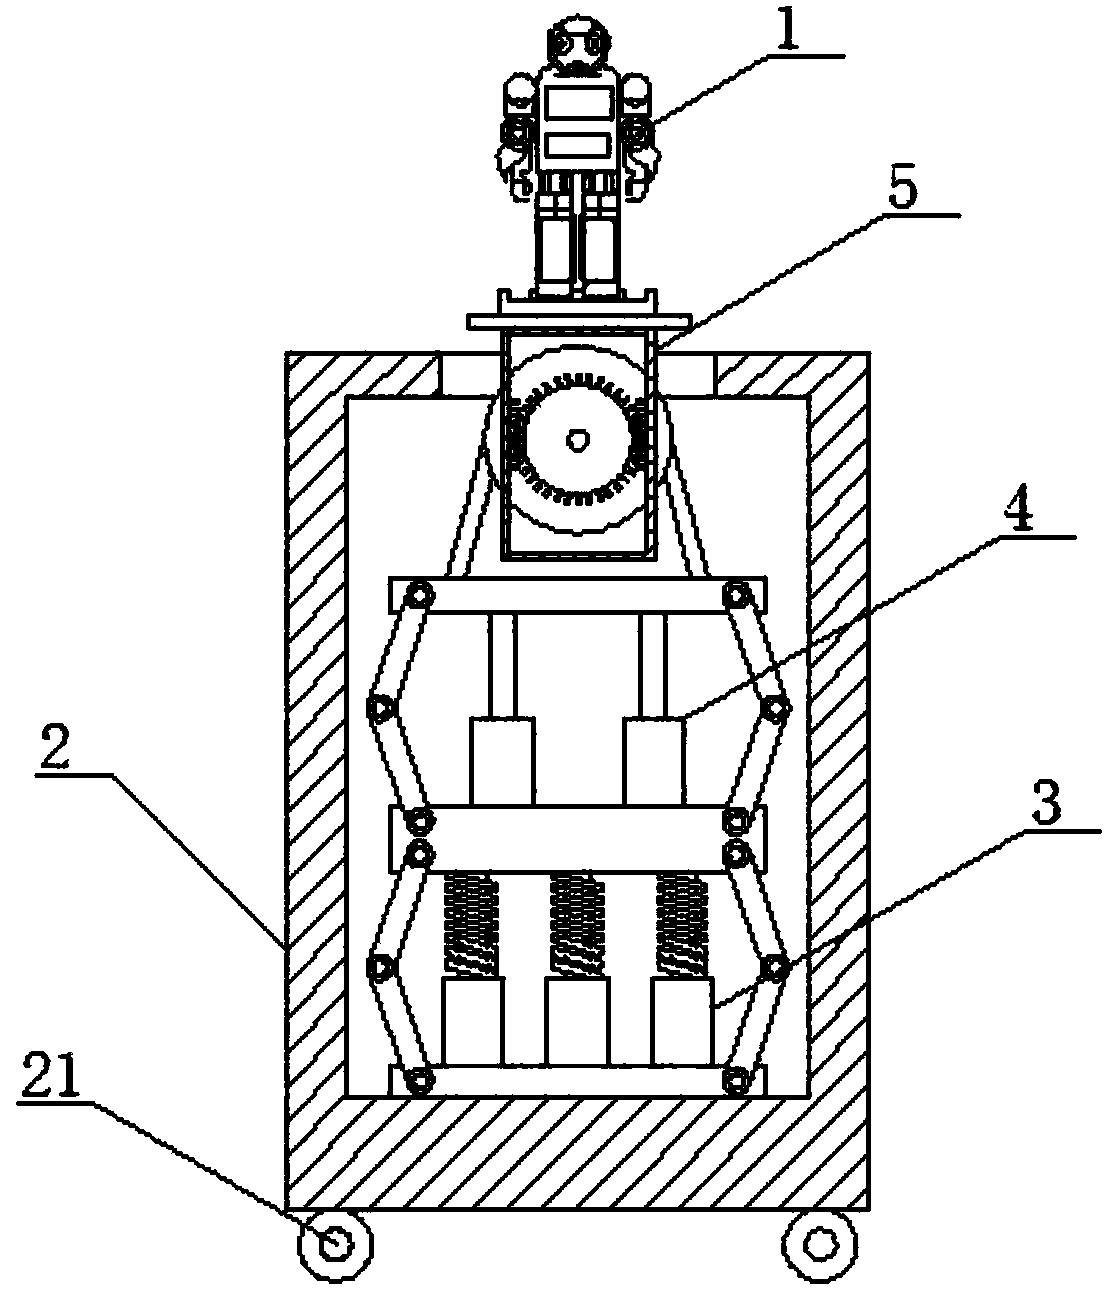 Robot chassis device capable of multi-stage lifting